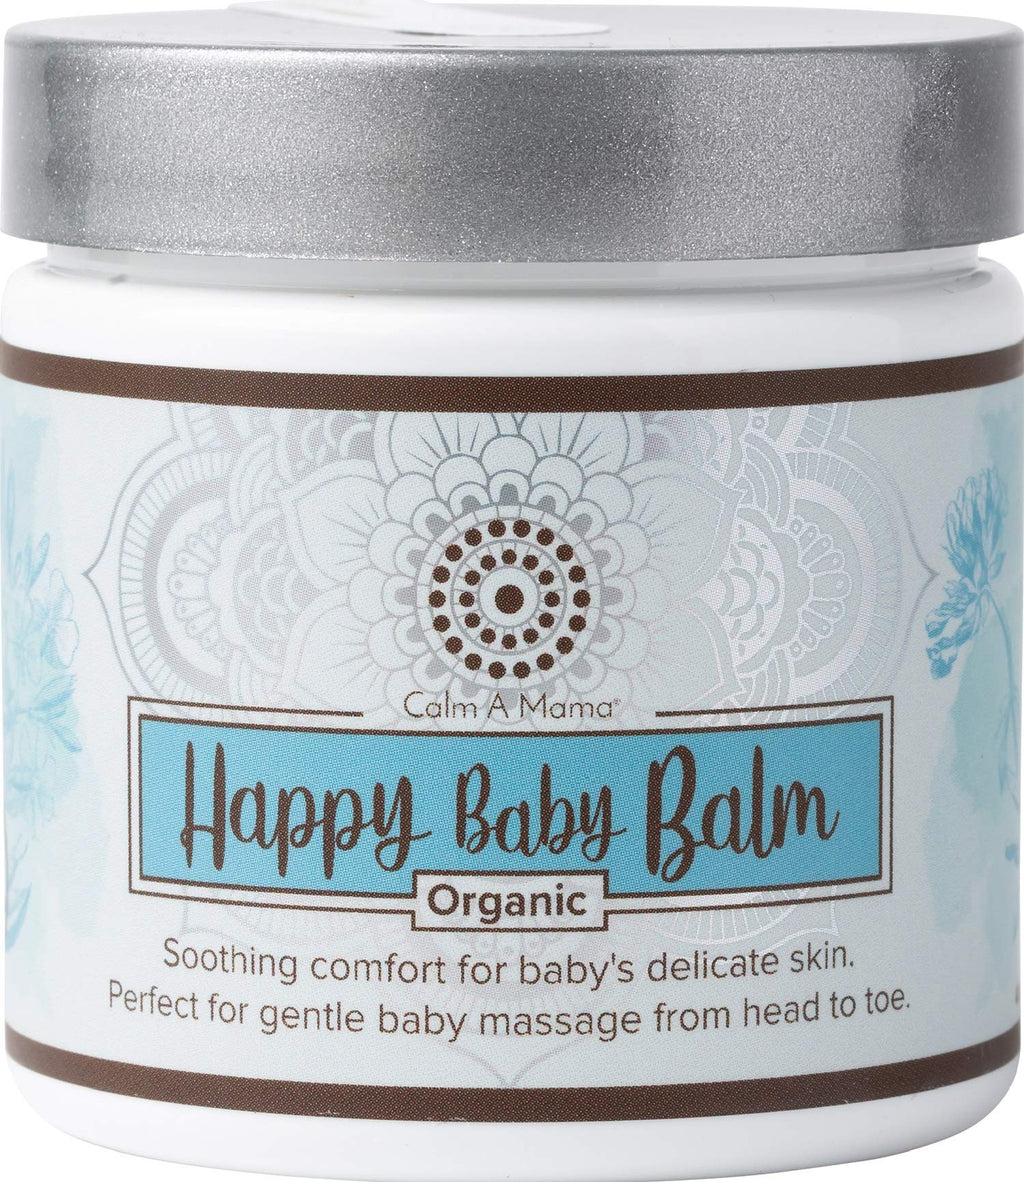 [Australia] - Happy Baby Balm by Calm-A-Mama (4 oz.) - Organic Diaper Cream for Healing and Soothing Baby Rash, Cradle Cap, Eczema and More - Lanolin-Free - Rash Ointment USDA Organic Certified Happy Balm 